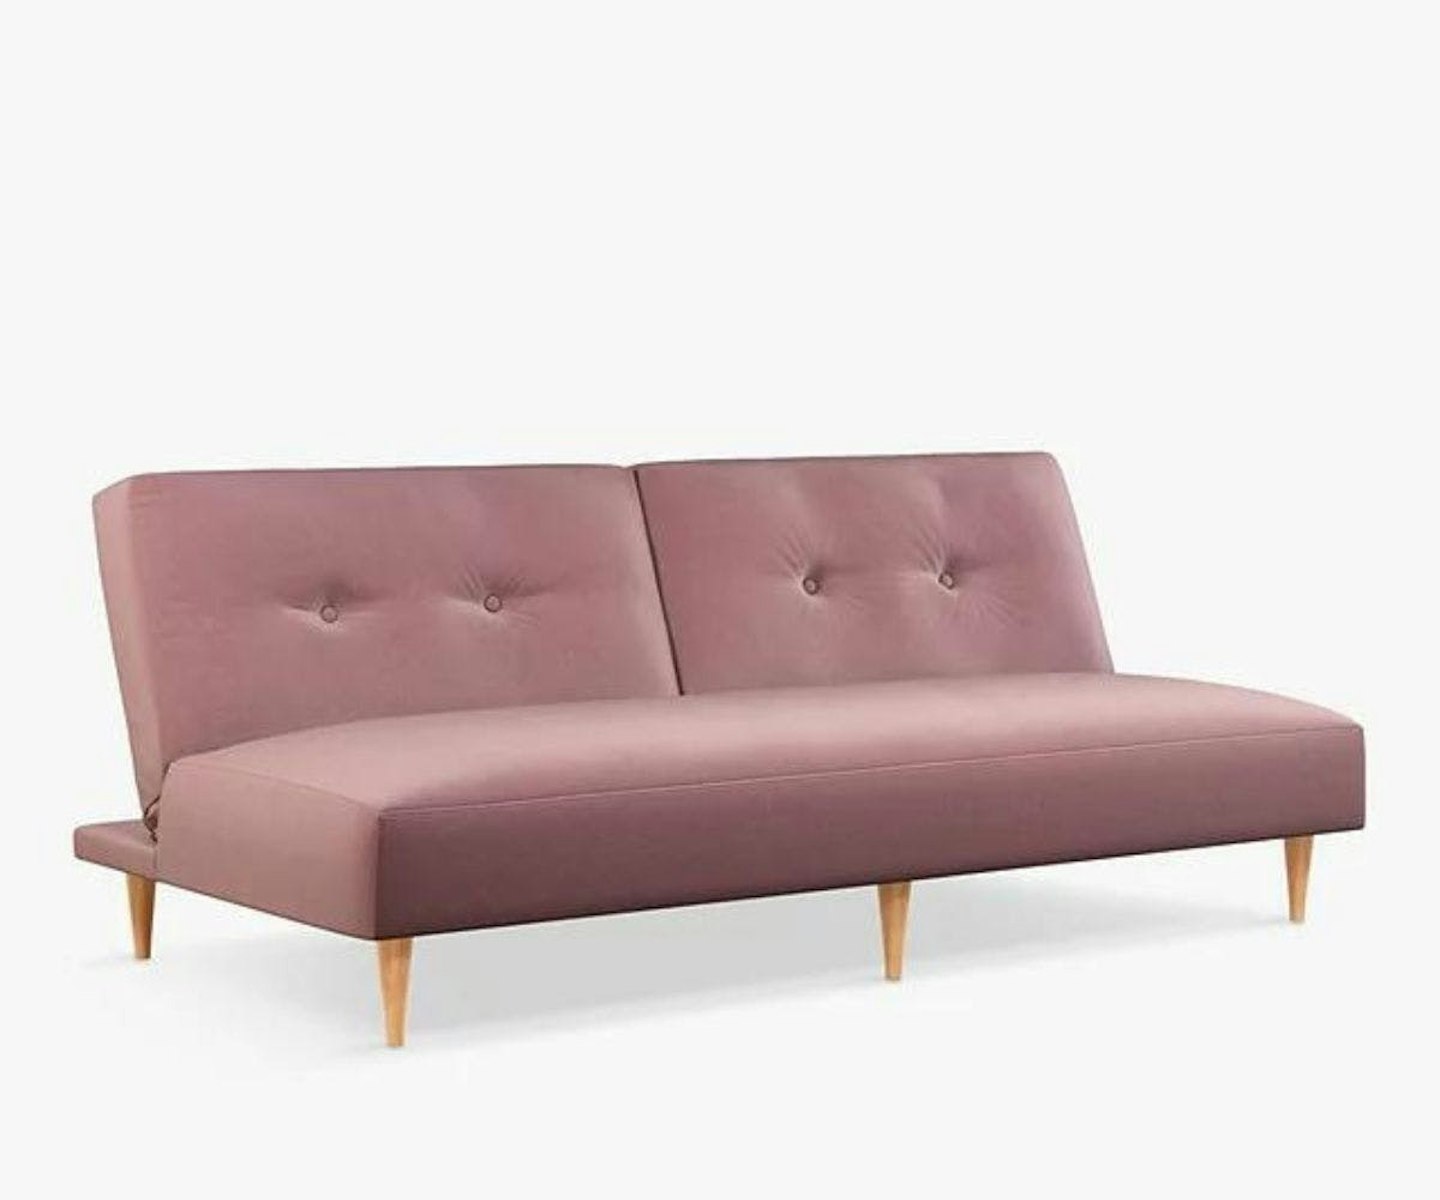 John Lewis, ANYDAY Clapton Fixed Back Sofa Bed